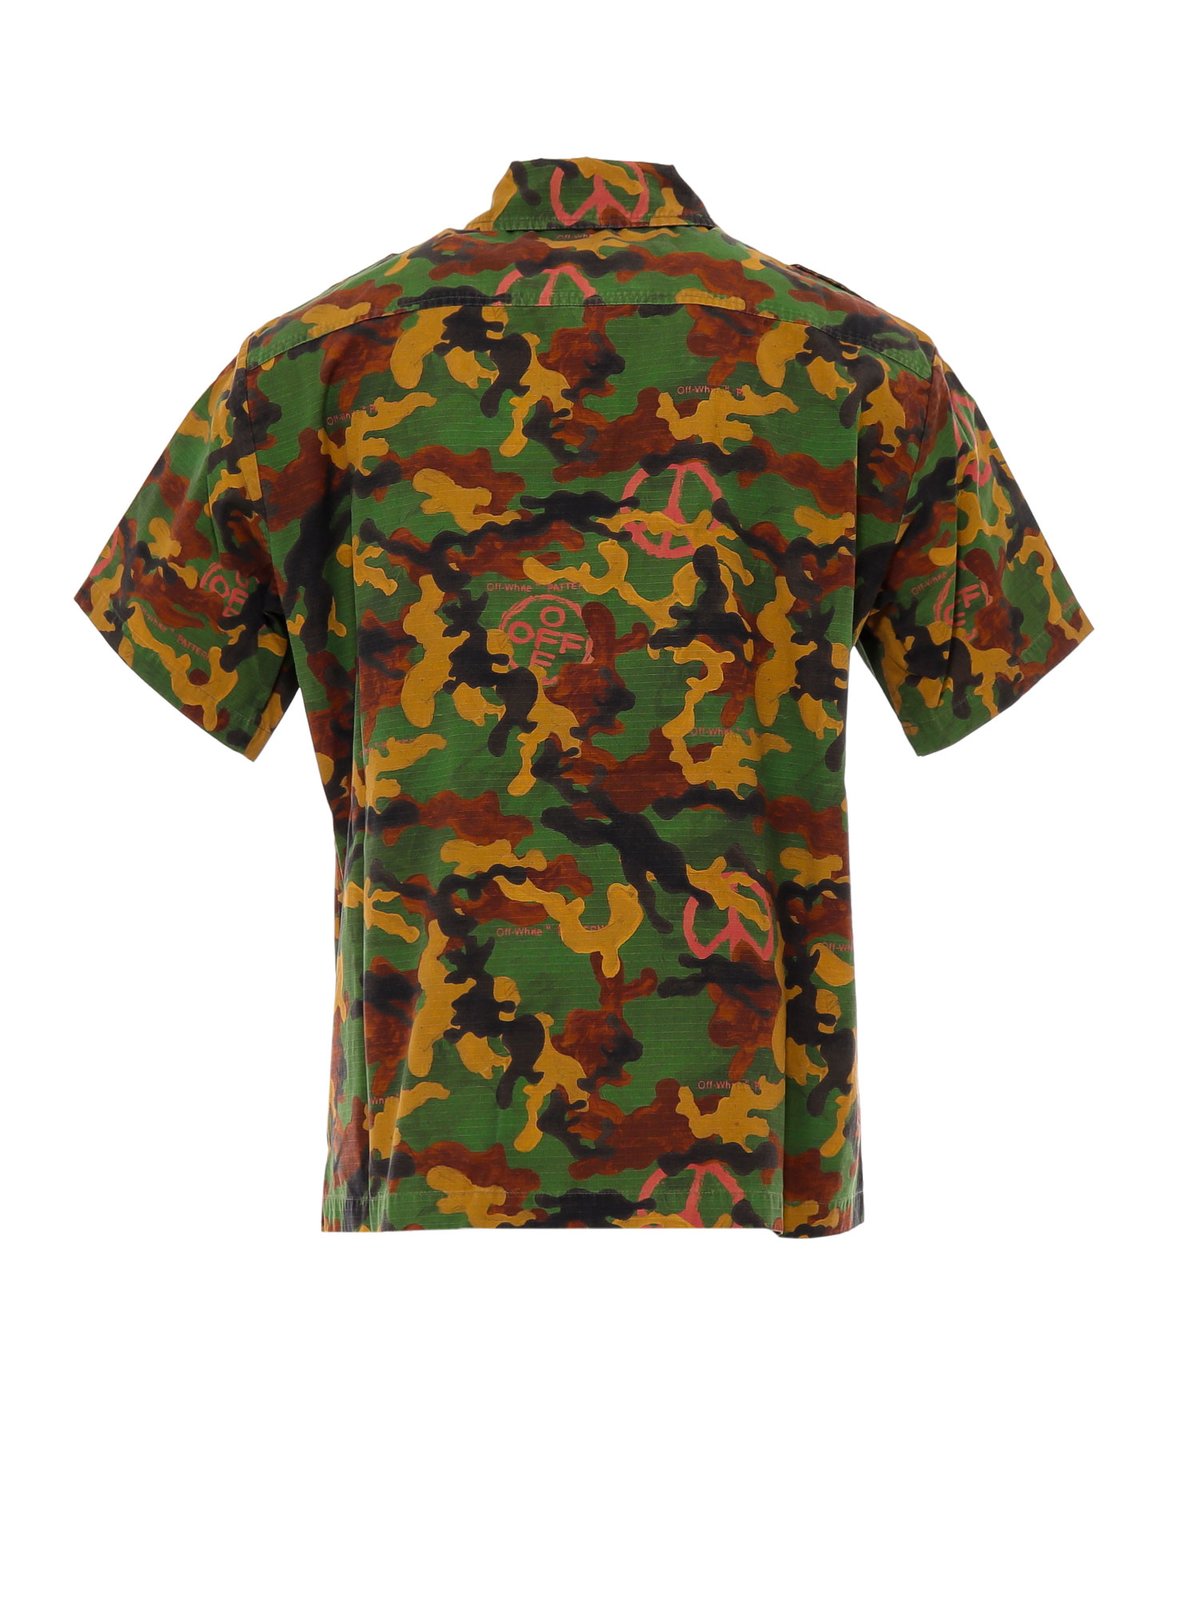 Off-White Camouflage Print Shirt